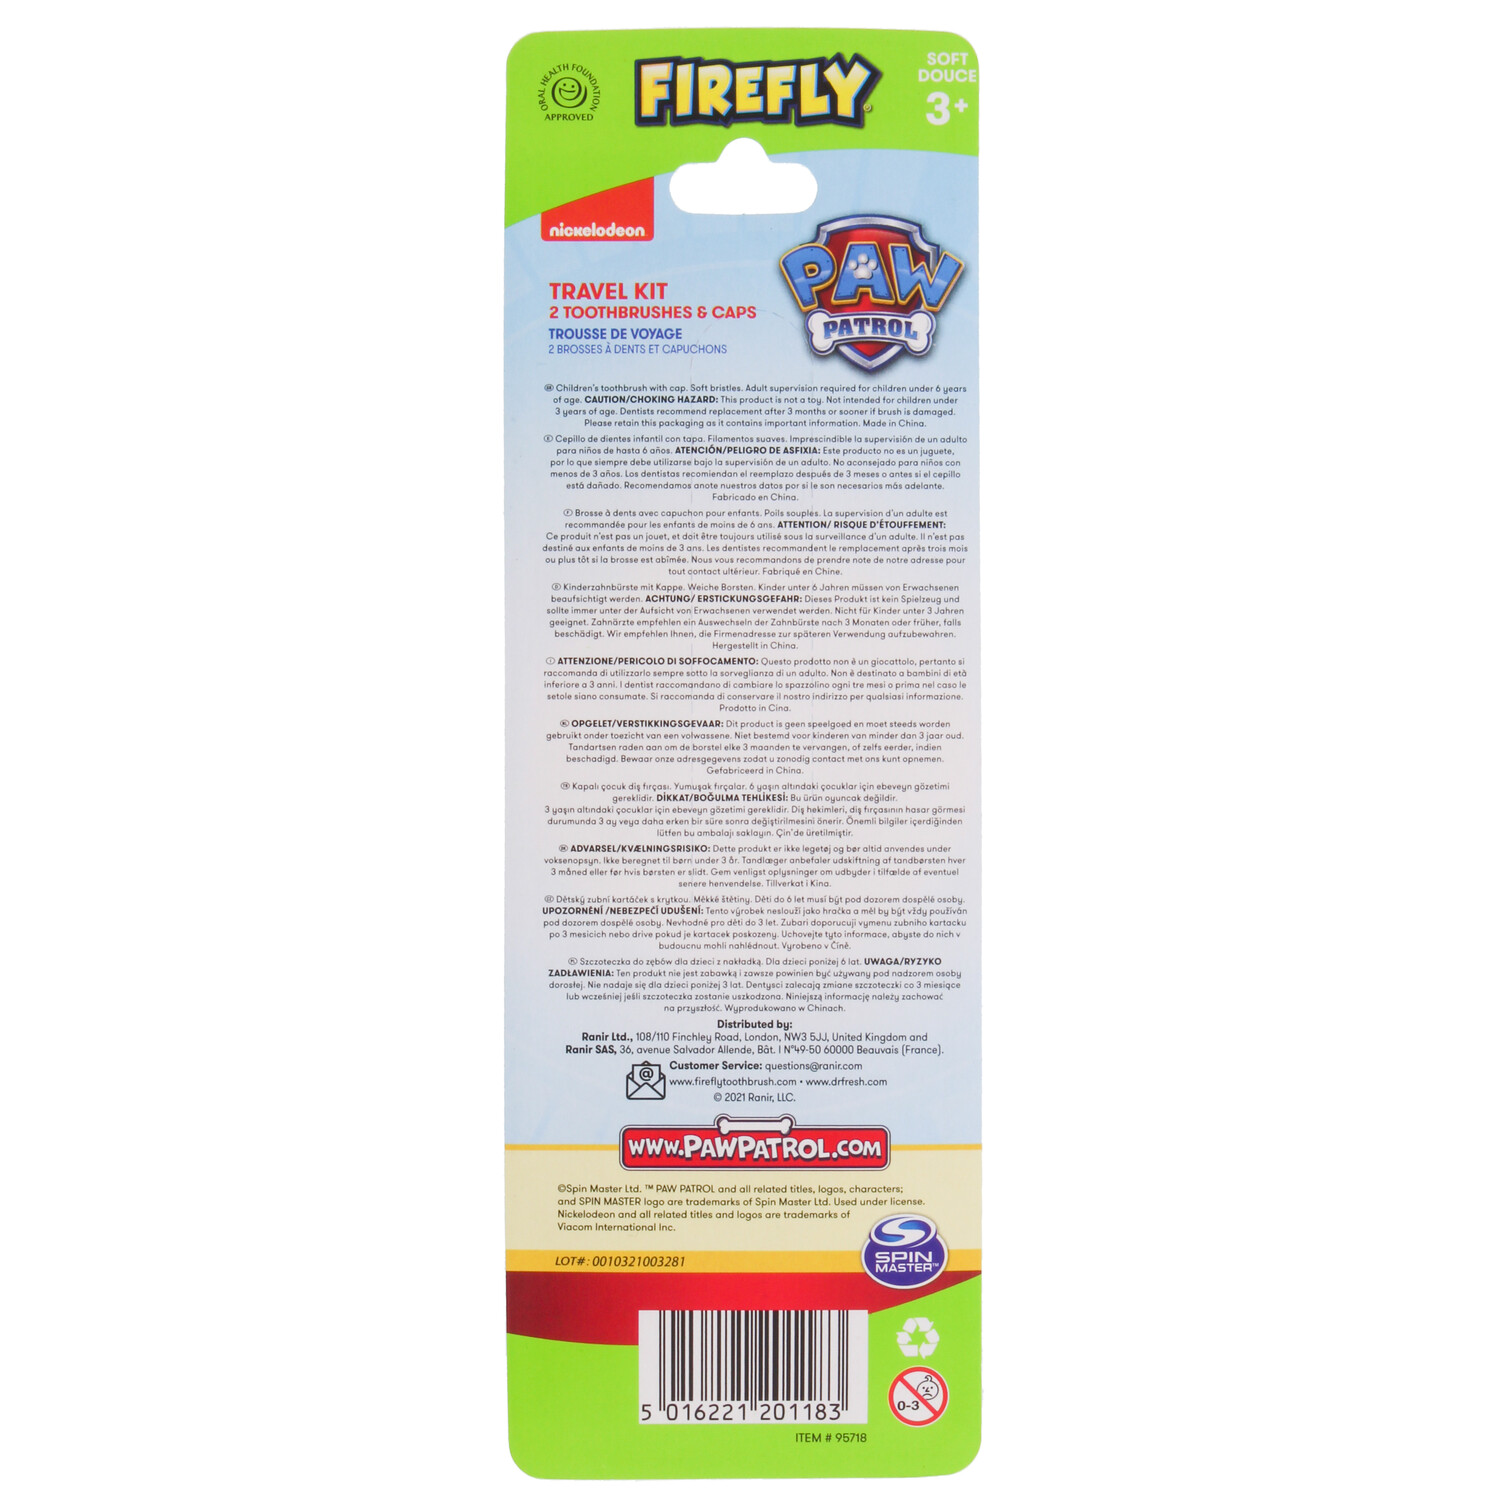 Pack of 2 Firefly Paw Patrol Toothbrushes and Caps Image 2